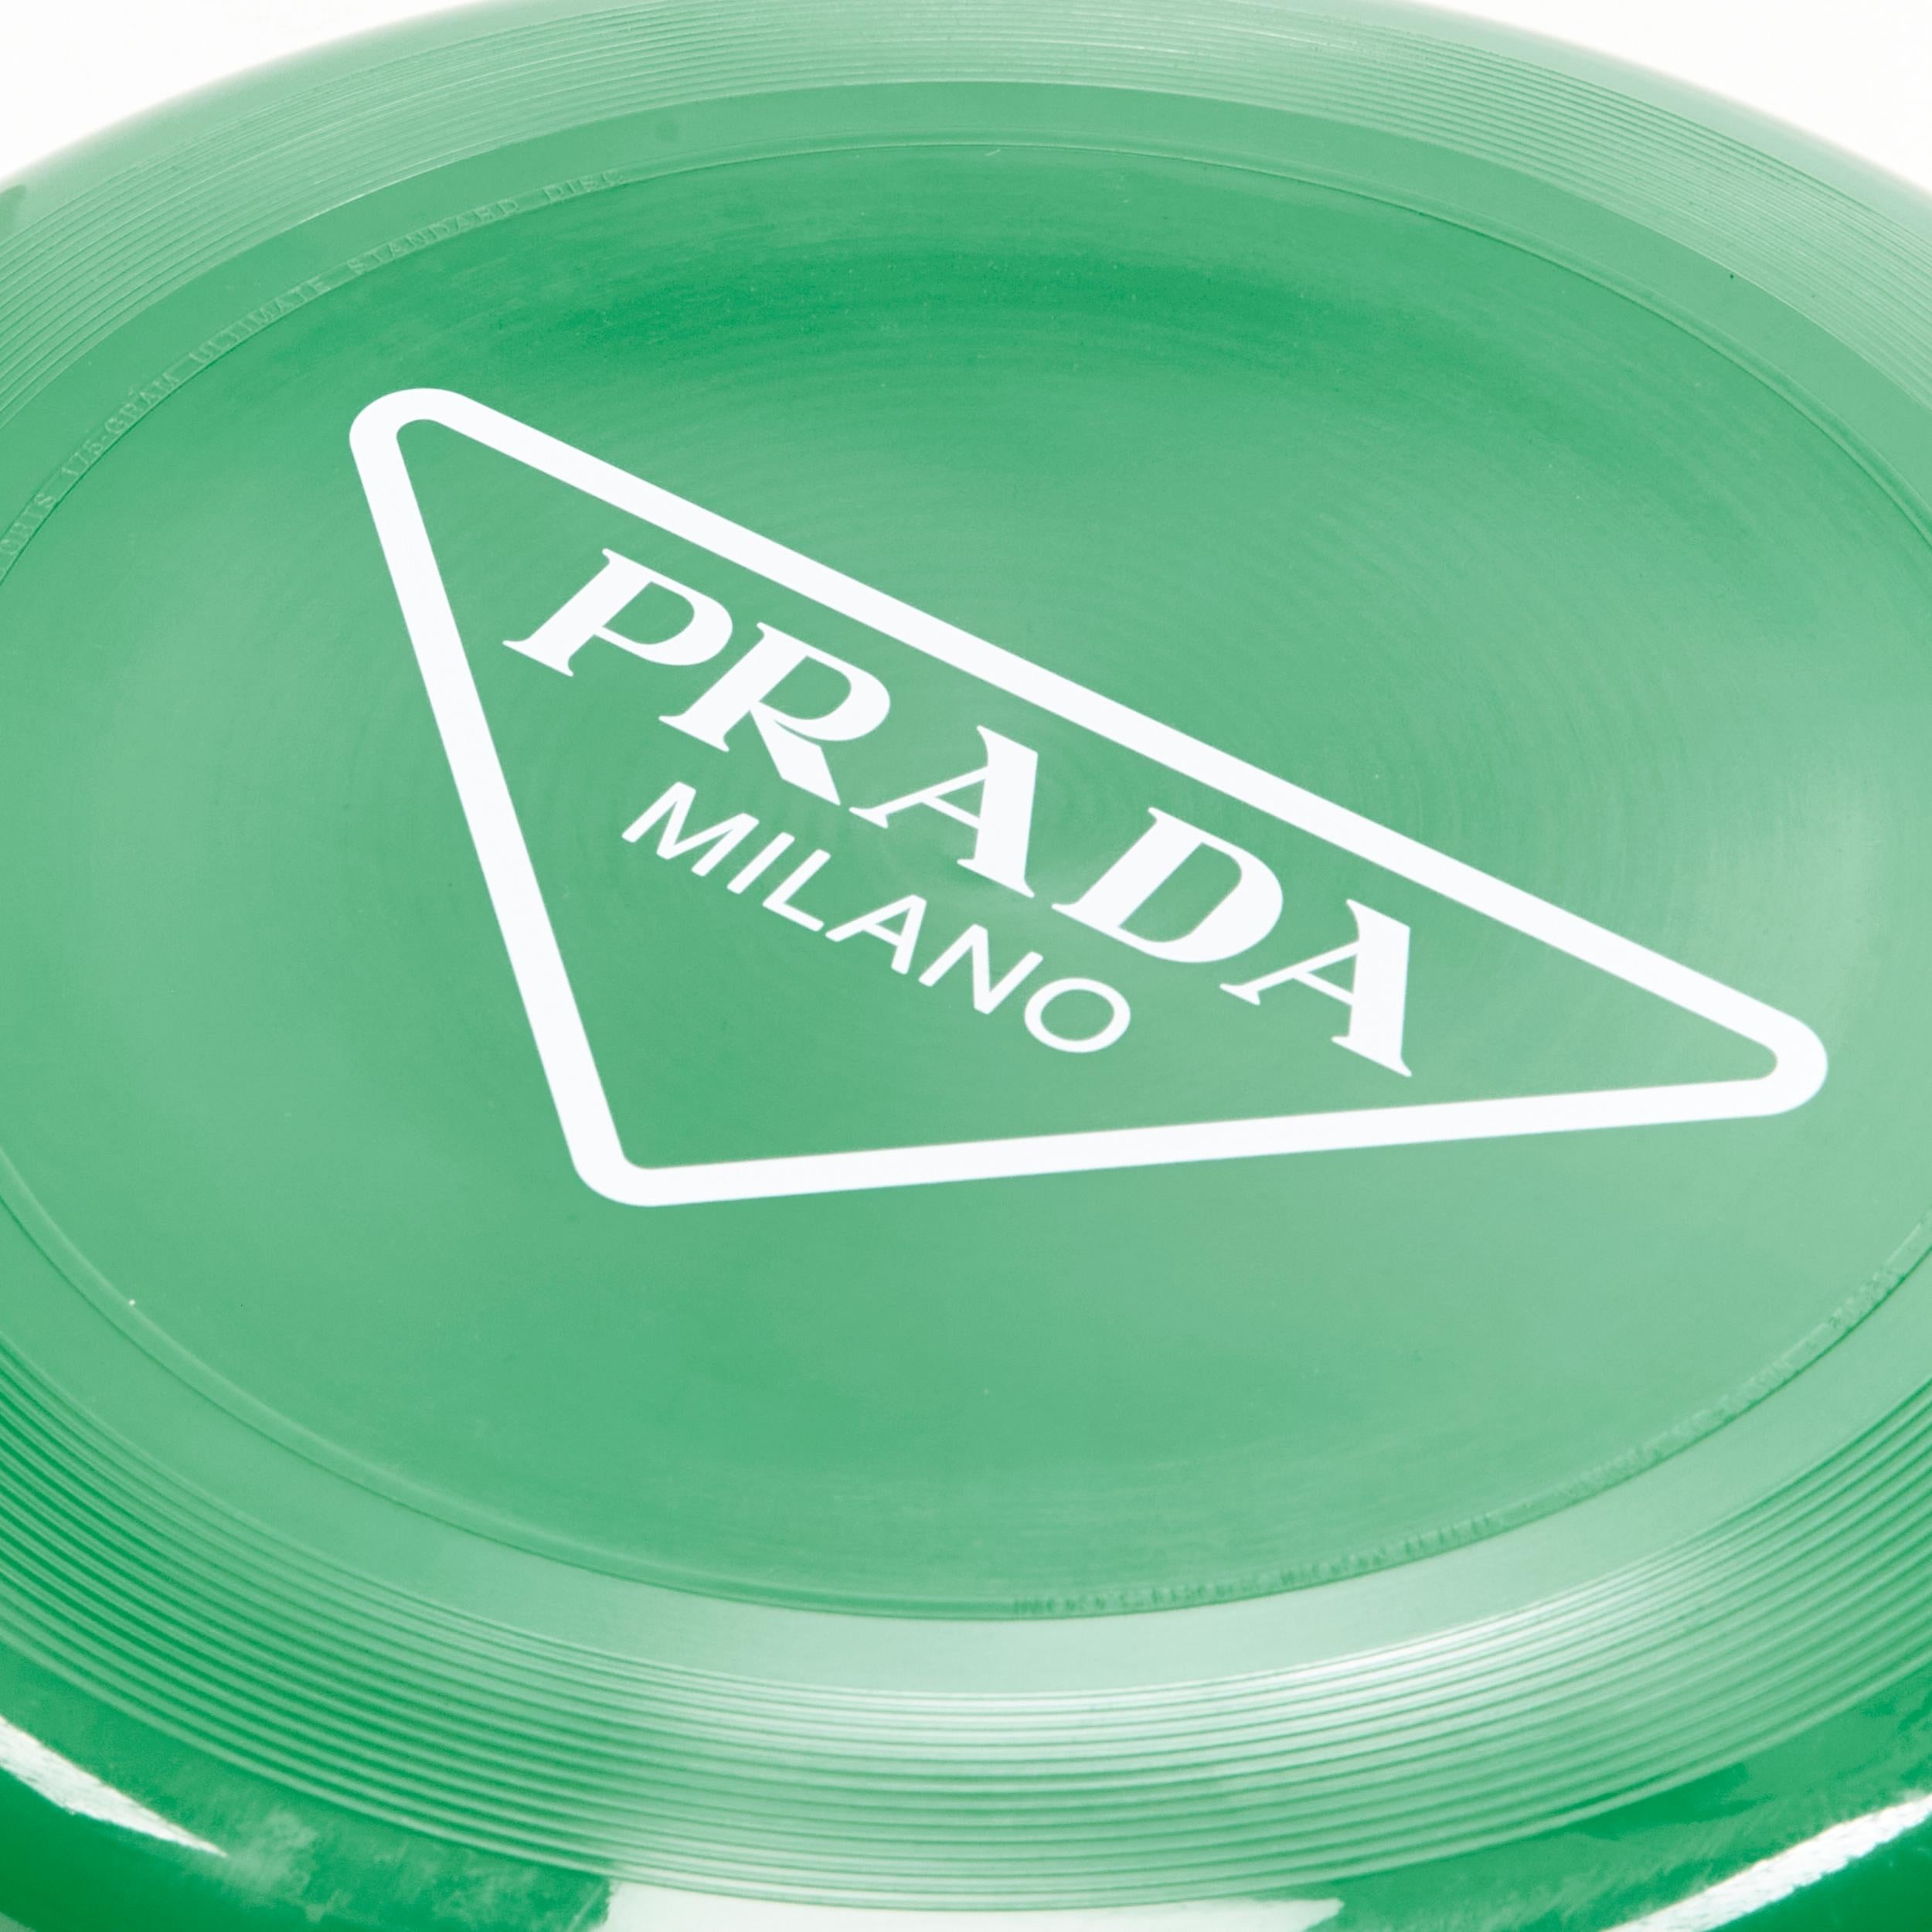 PRADA Tropico 2022 Limited Edition Collectible white logo print beach frisbee 
Reference: JOMK/A00078 
Brand: Prada 
Designer: Miuccia Prada 
Material: Plastic 
Color: Green 
Pattern: Solid 

CONDITION: 
Condition: New without tags. 

MEASUREMENTS: